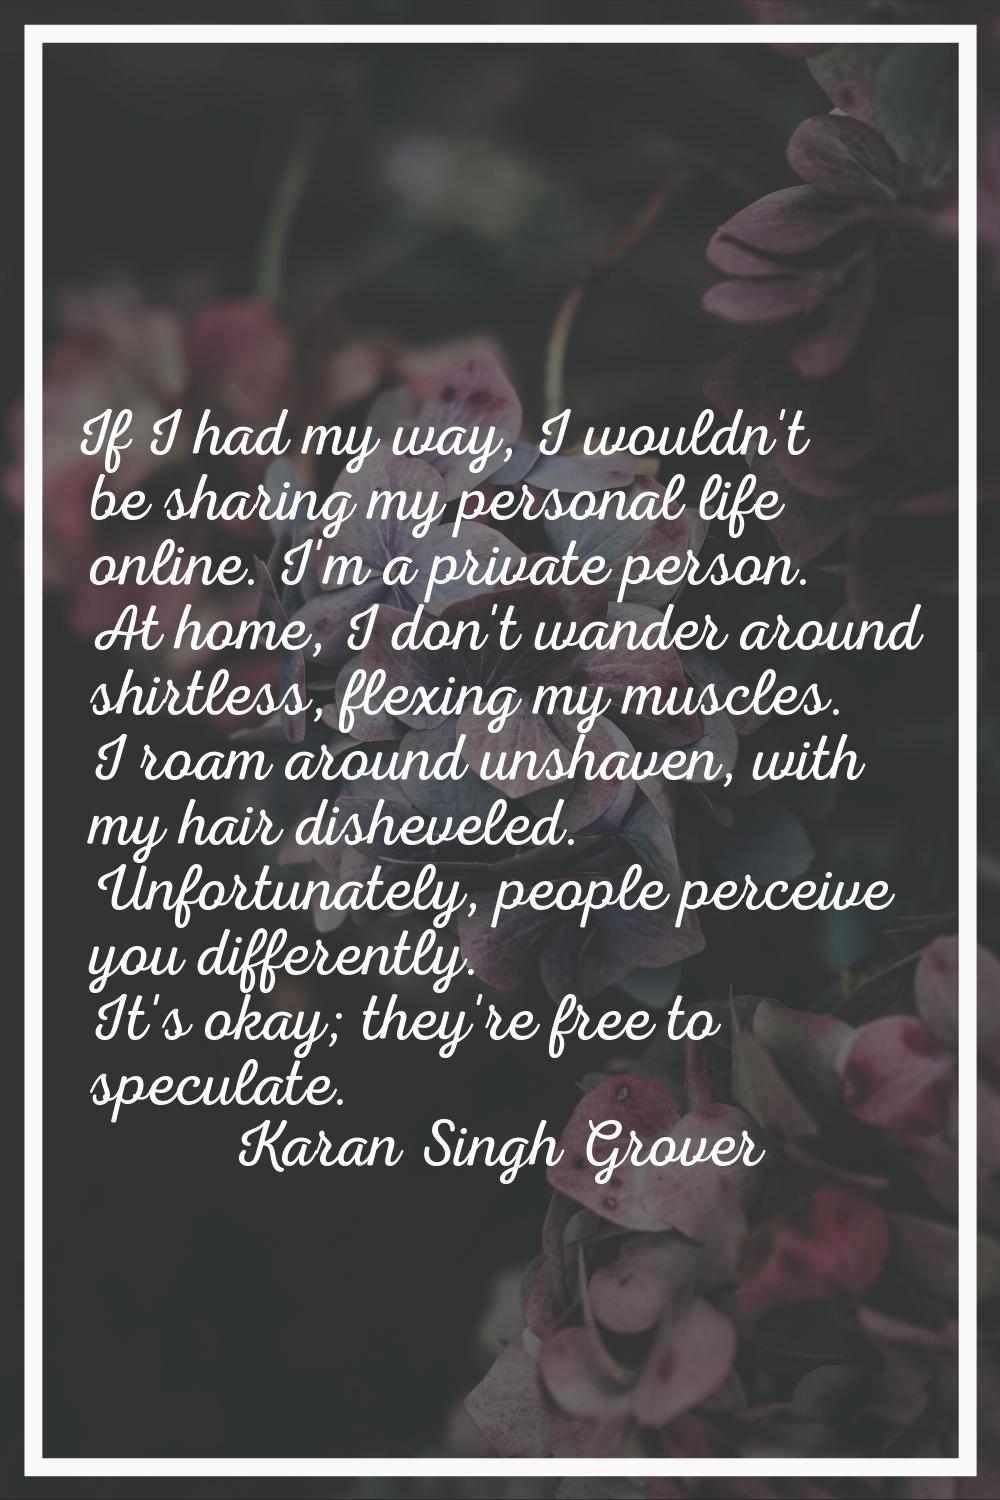 If I had my way, I wouldn't be sharing my personal life online. I'm a private person. At home, I do